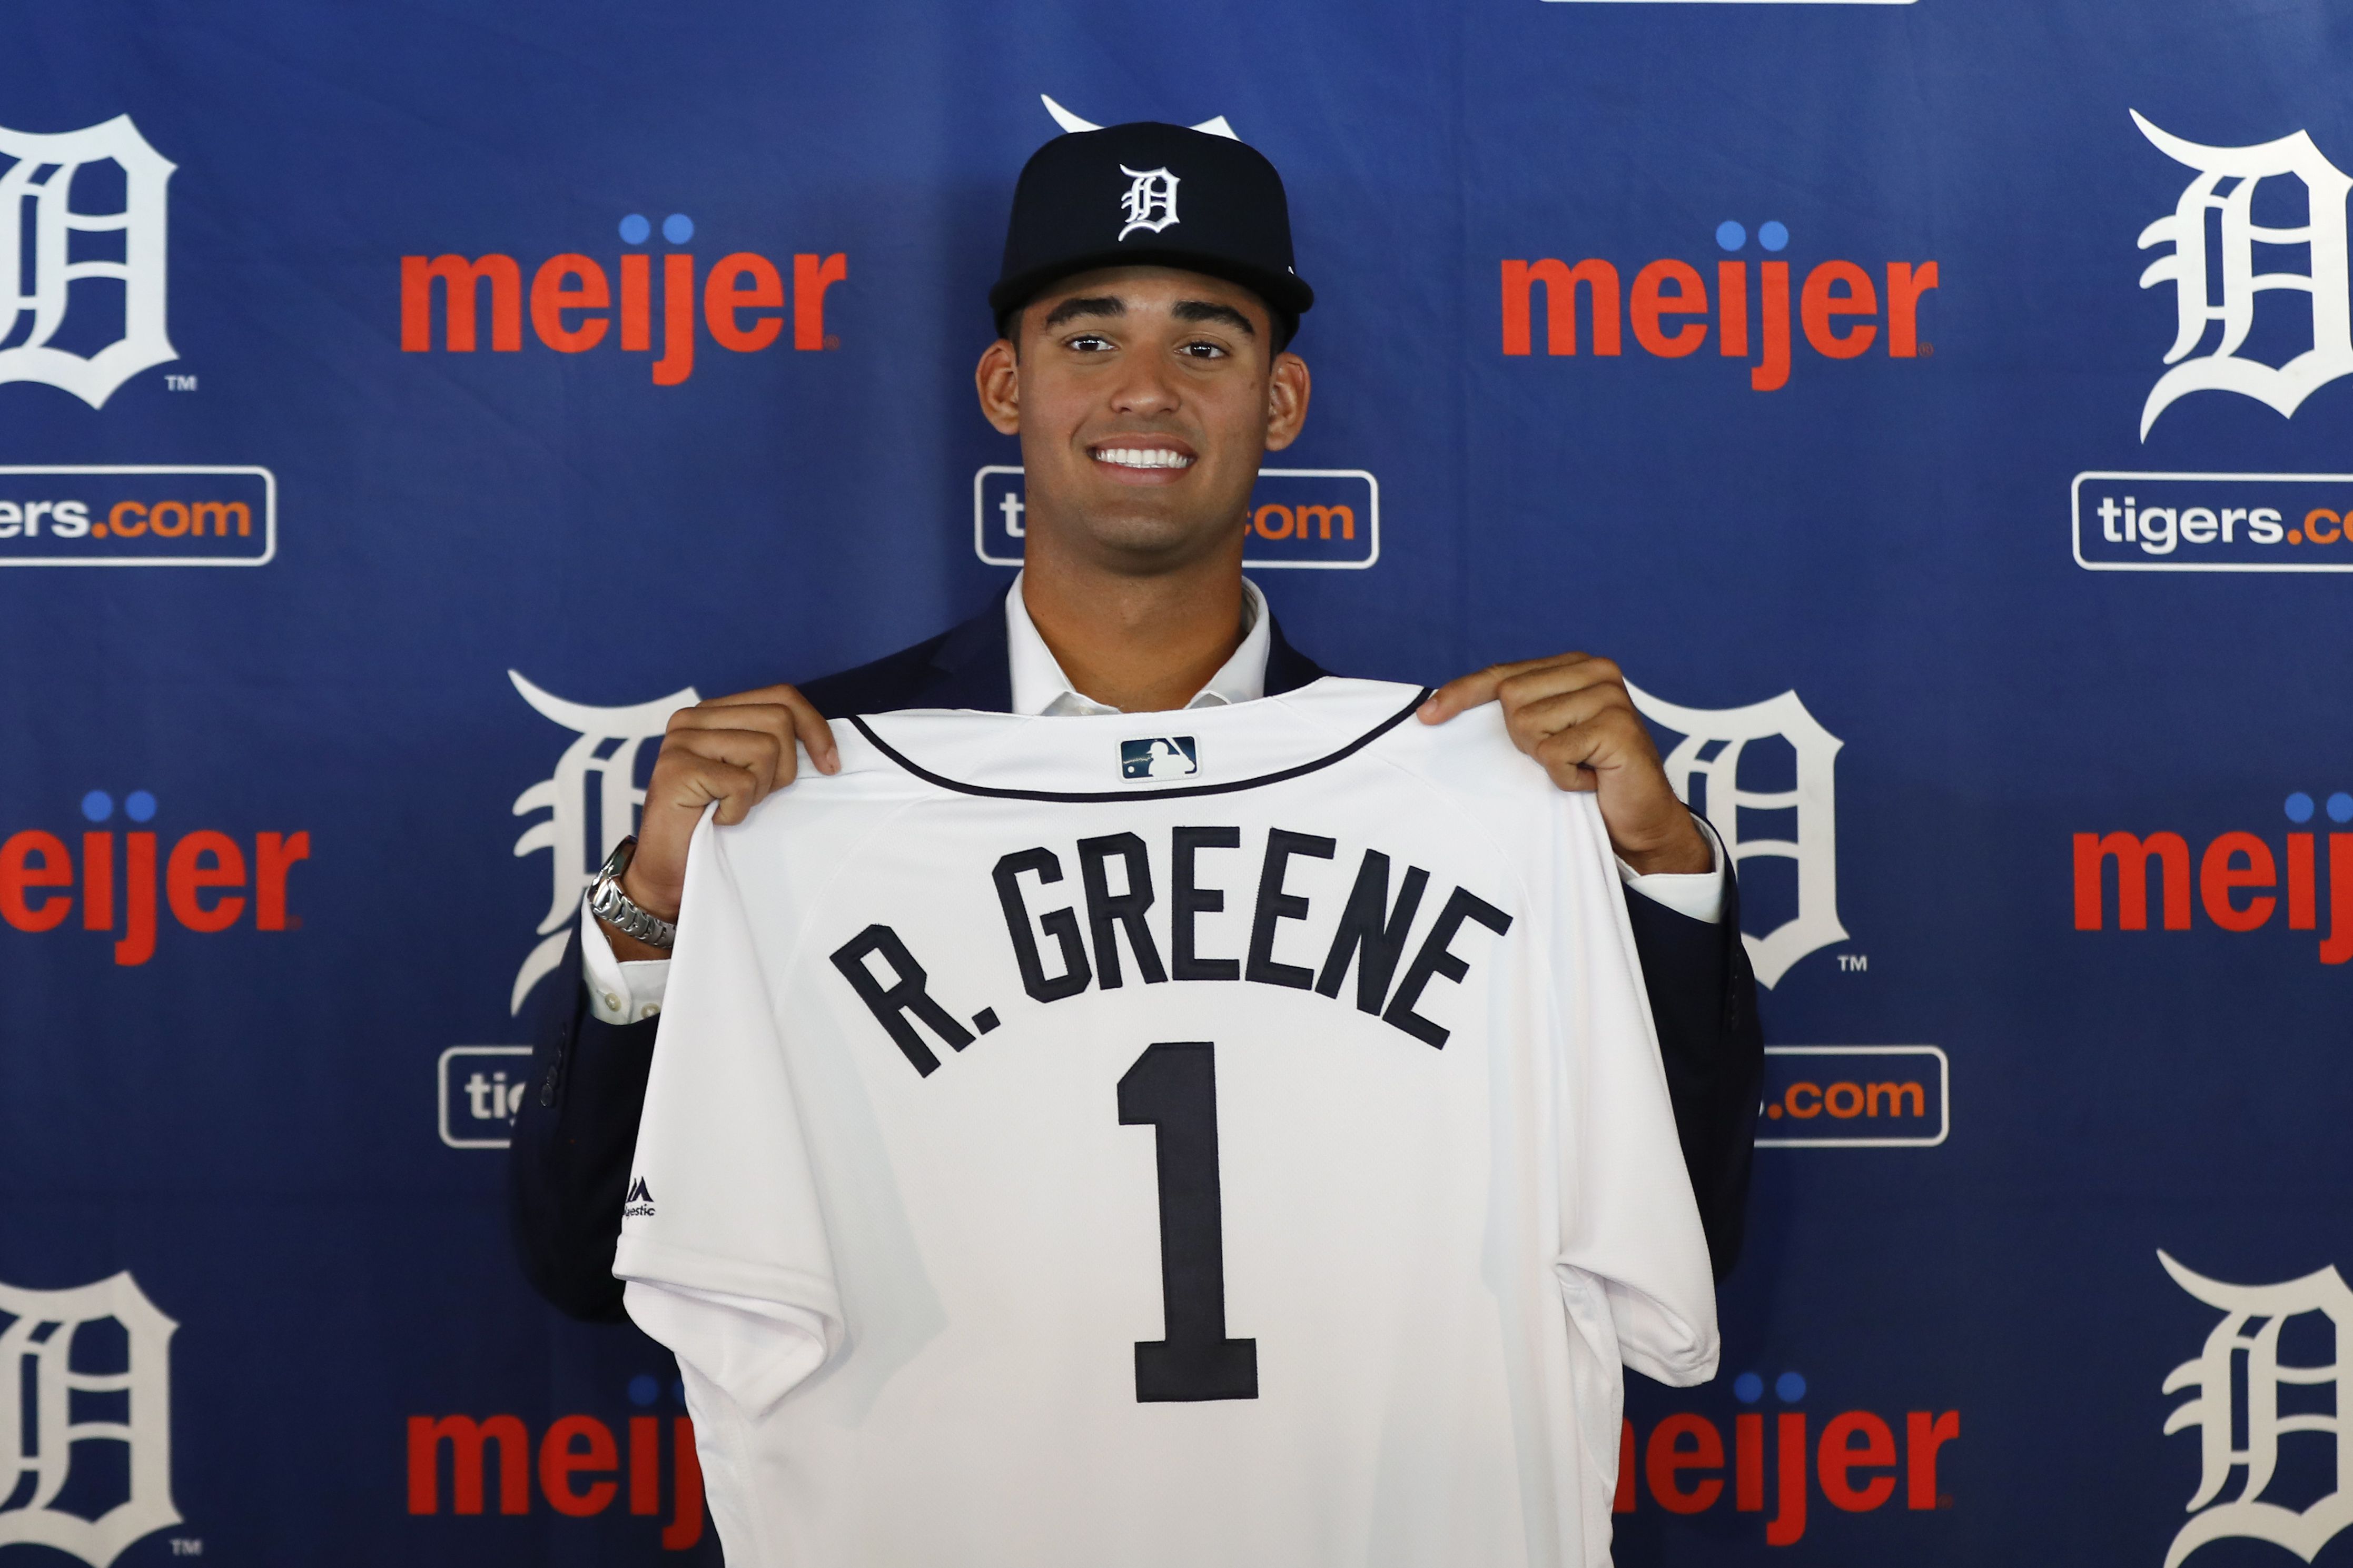 Detroit Tigers on X: Got our guy! With the first pick in the 2020